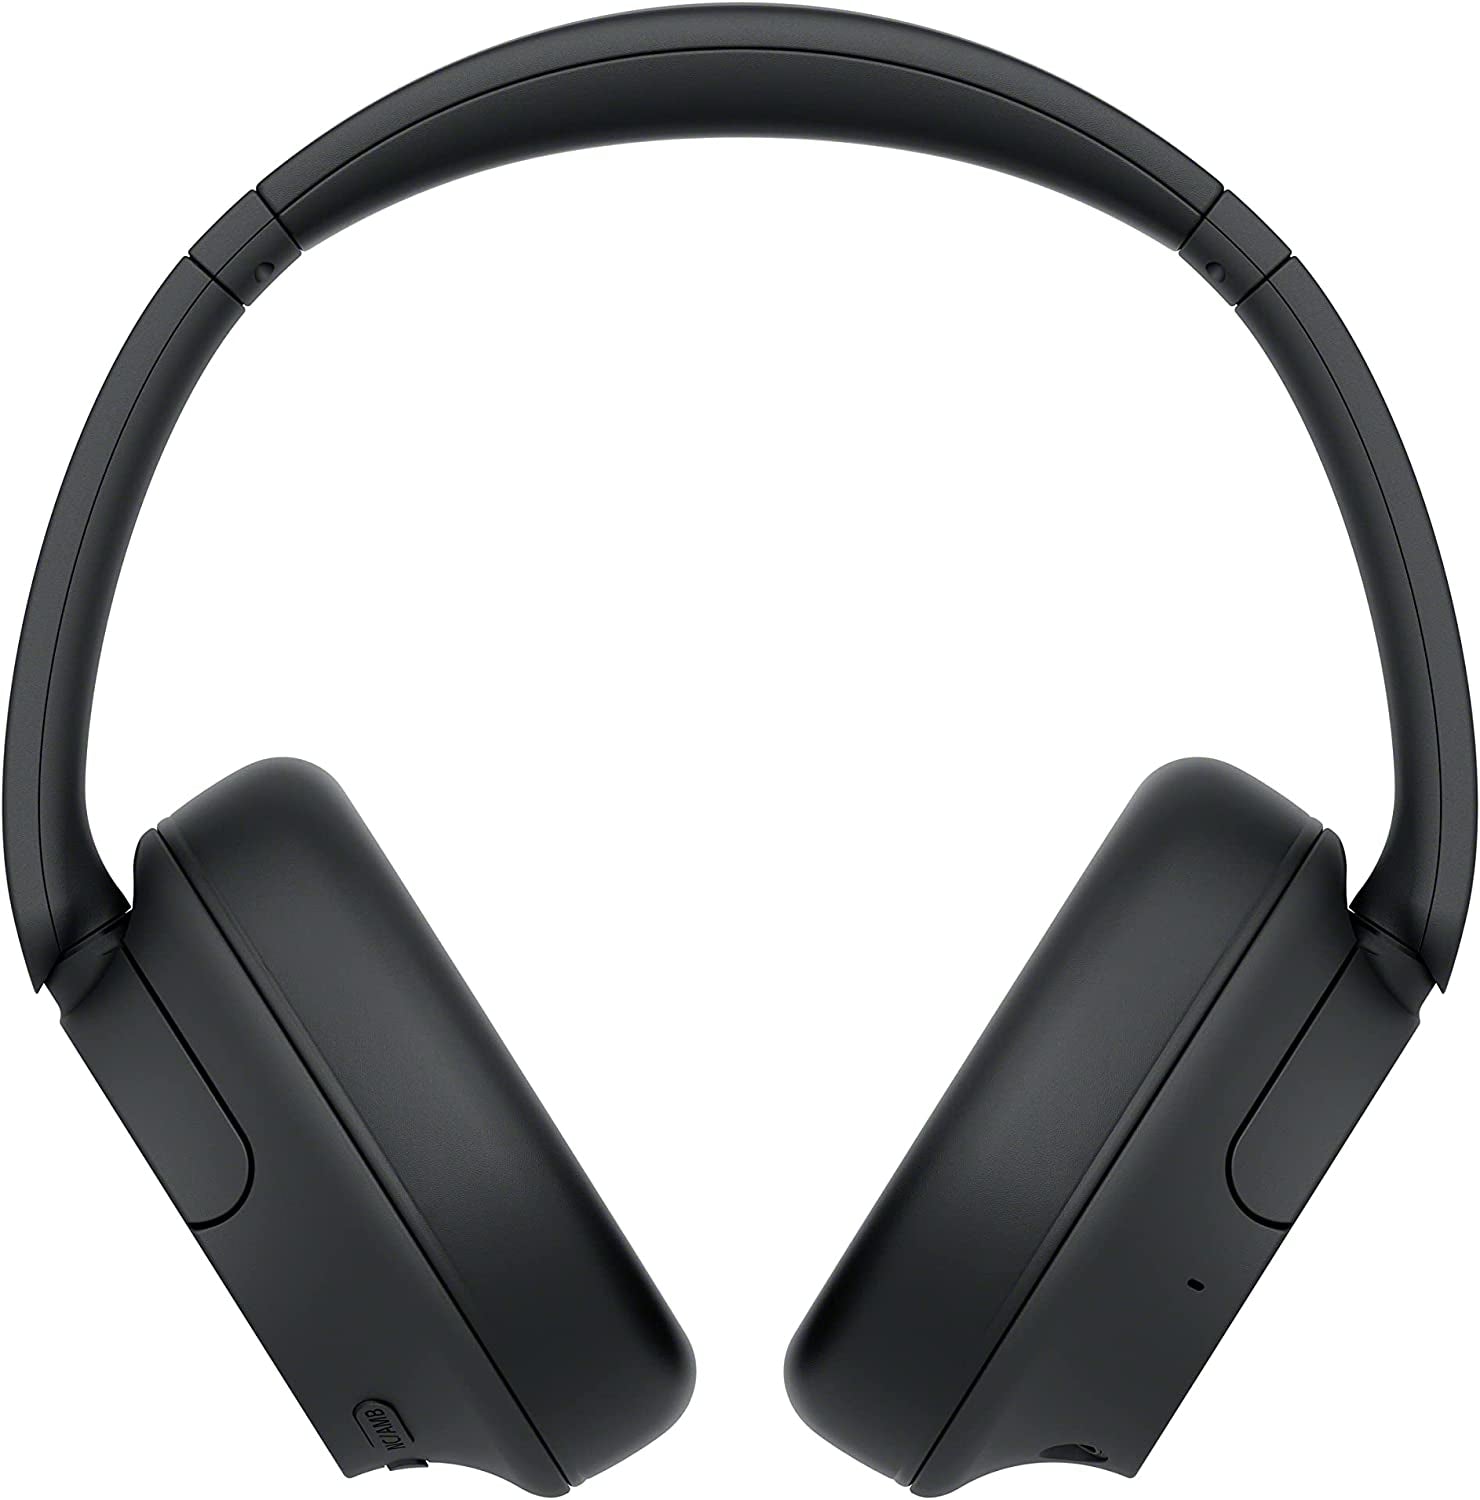 WH-CH720N Noise Cancelling Wireless Bluetooth Headphones - up to 35 Hours Battery Life and Quick Charge - Black